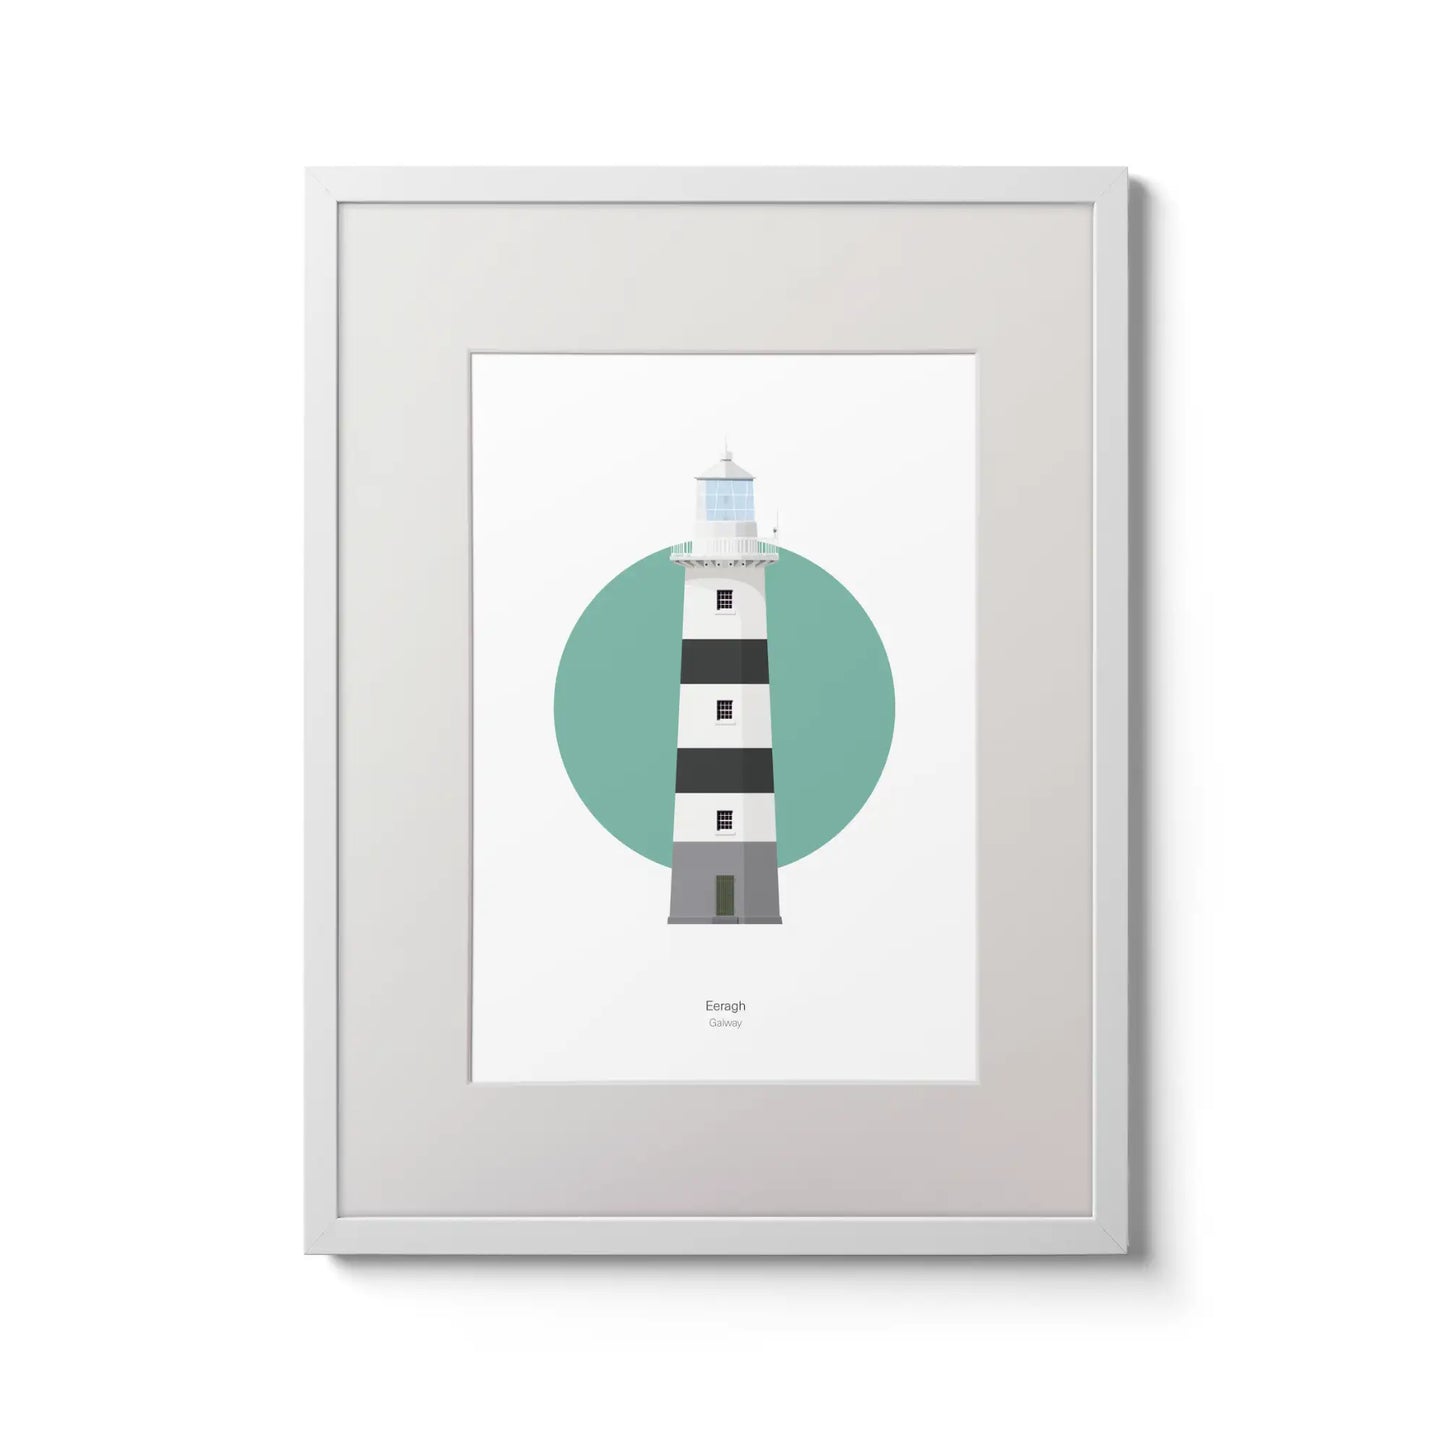 Contemporary wall art decor of Eeragh lighthouse on a white background inside light blue square,  in a white frame measuring 30x40cm.